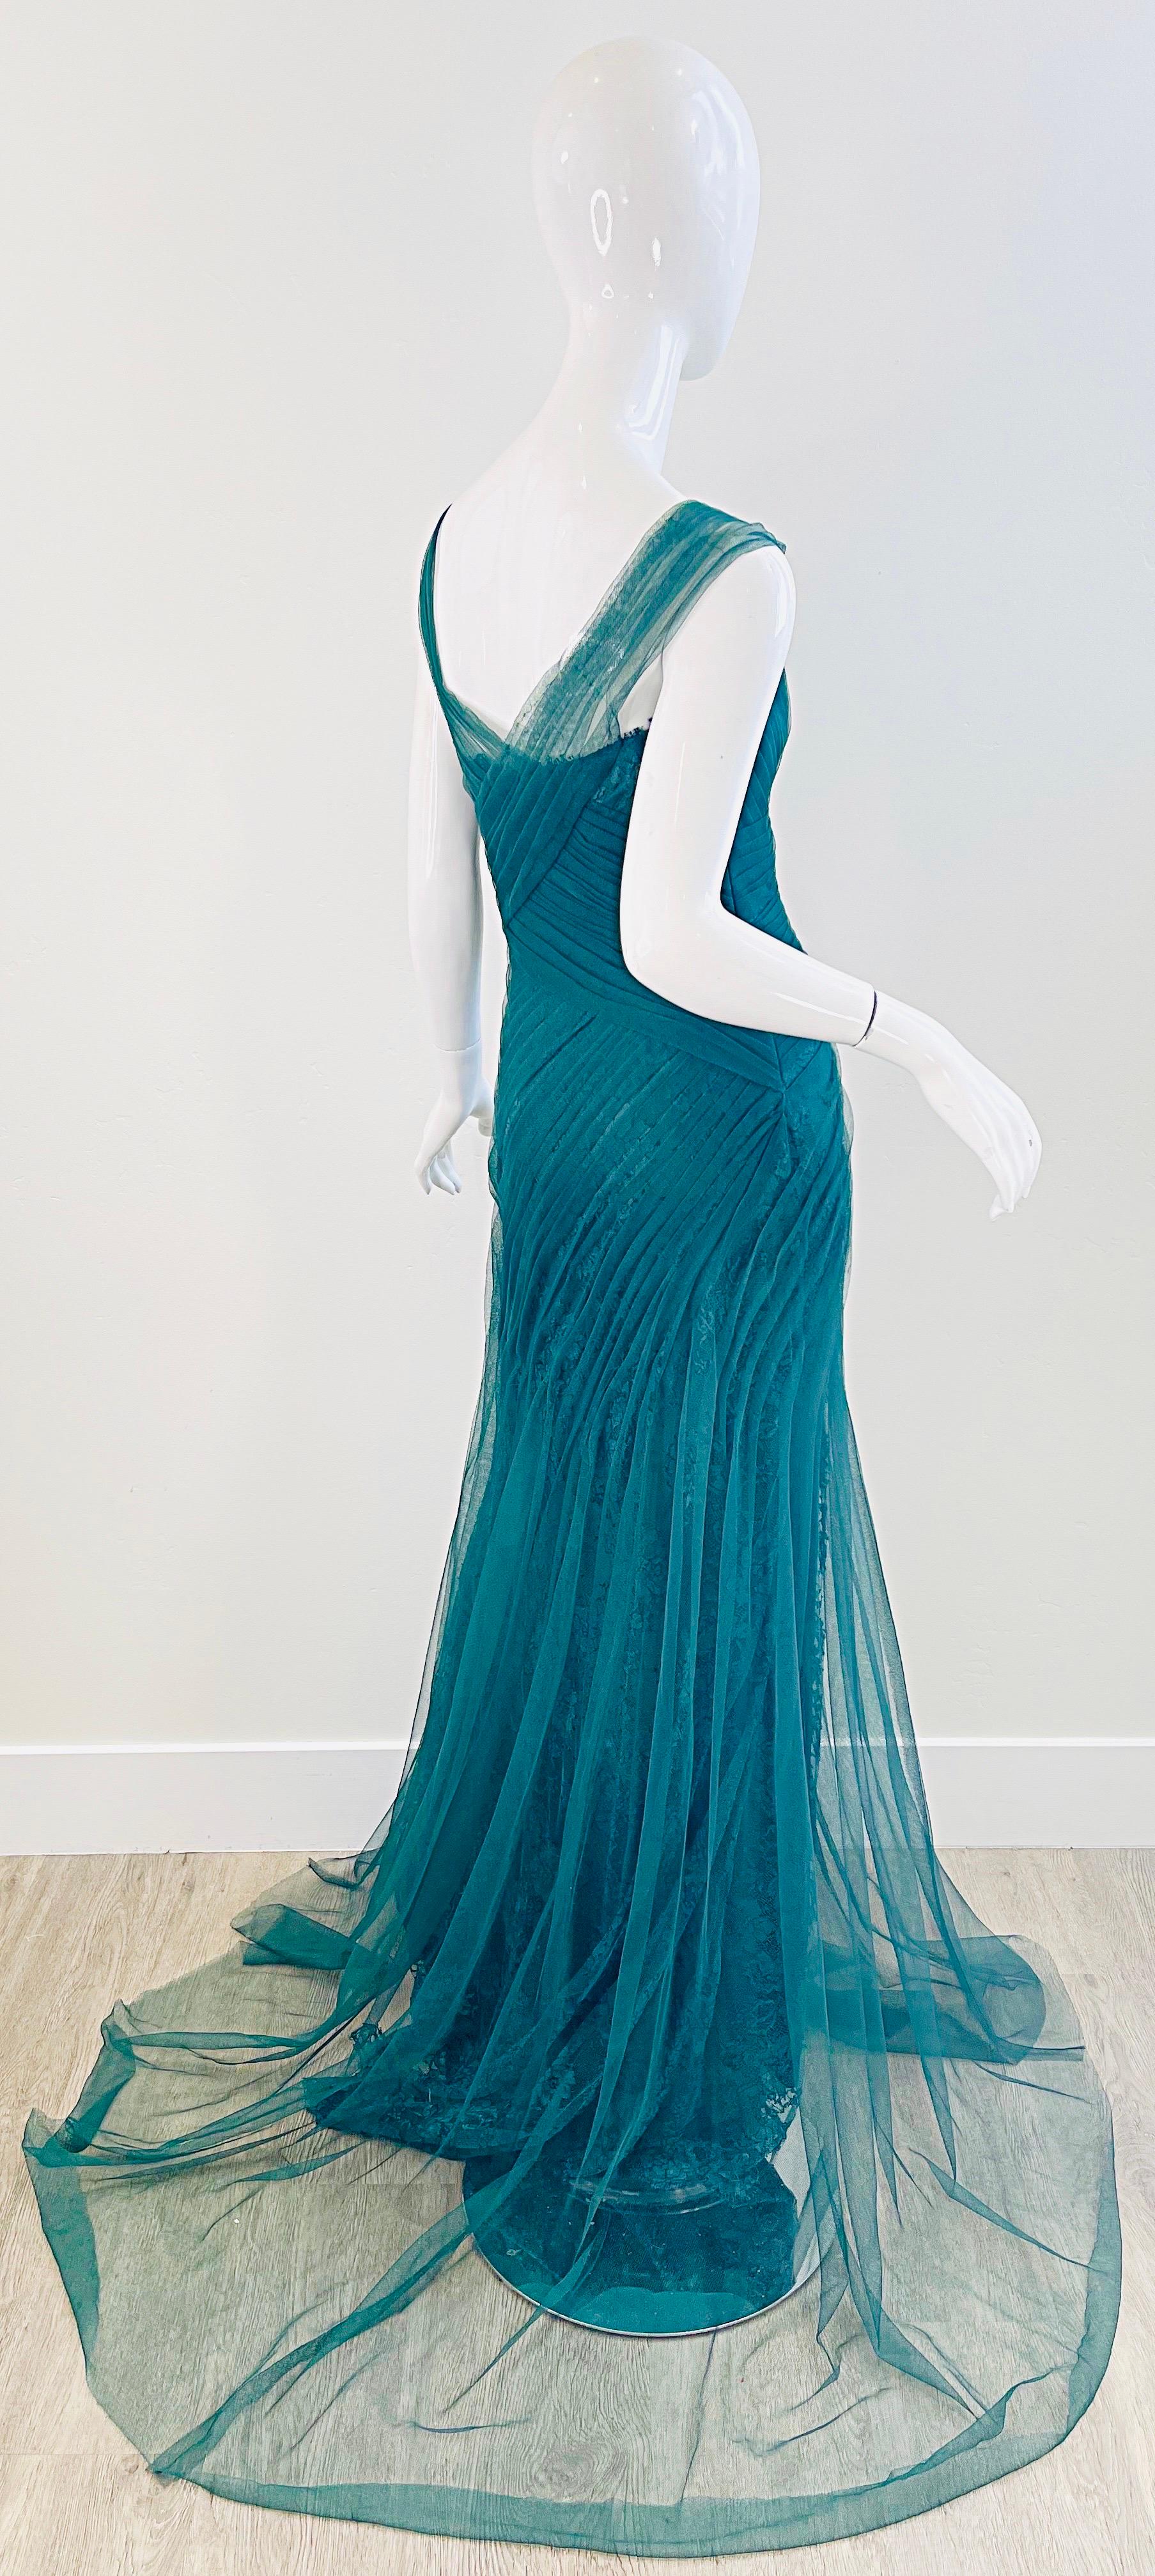 NWT Monique Lhuillier Runway Spring 2013 Size 4 Emerald Green Lace Gown Dress For Sale 2